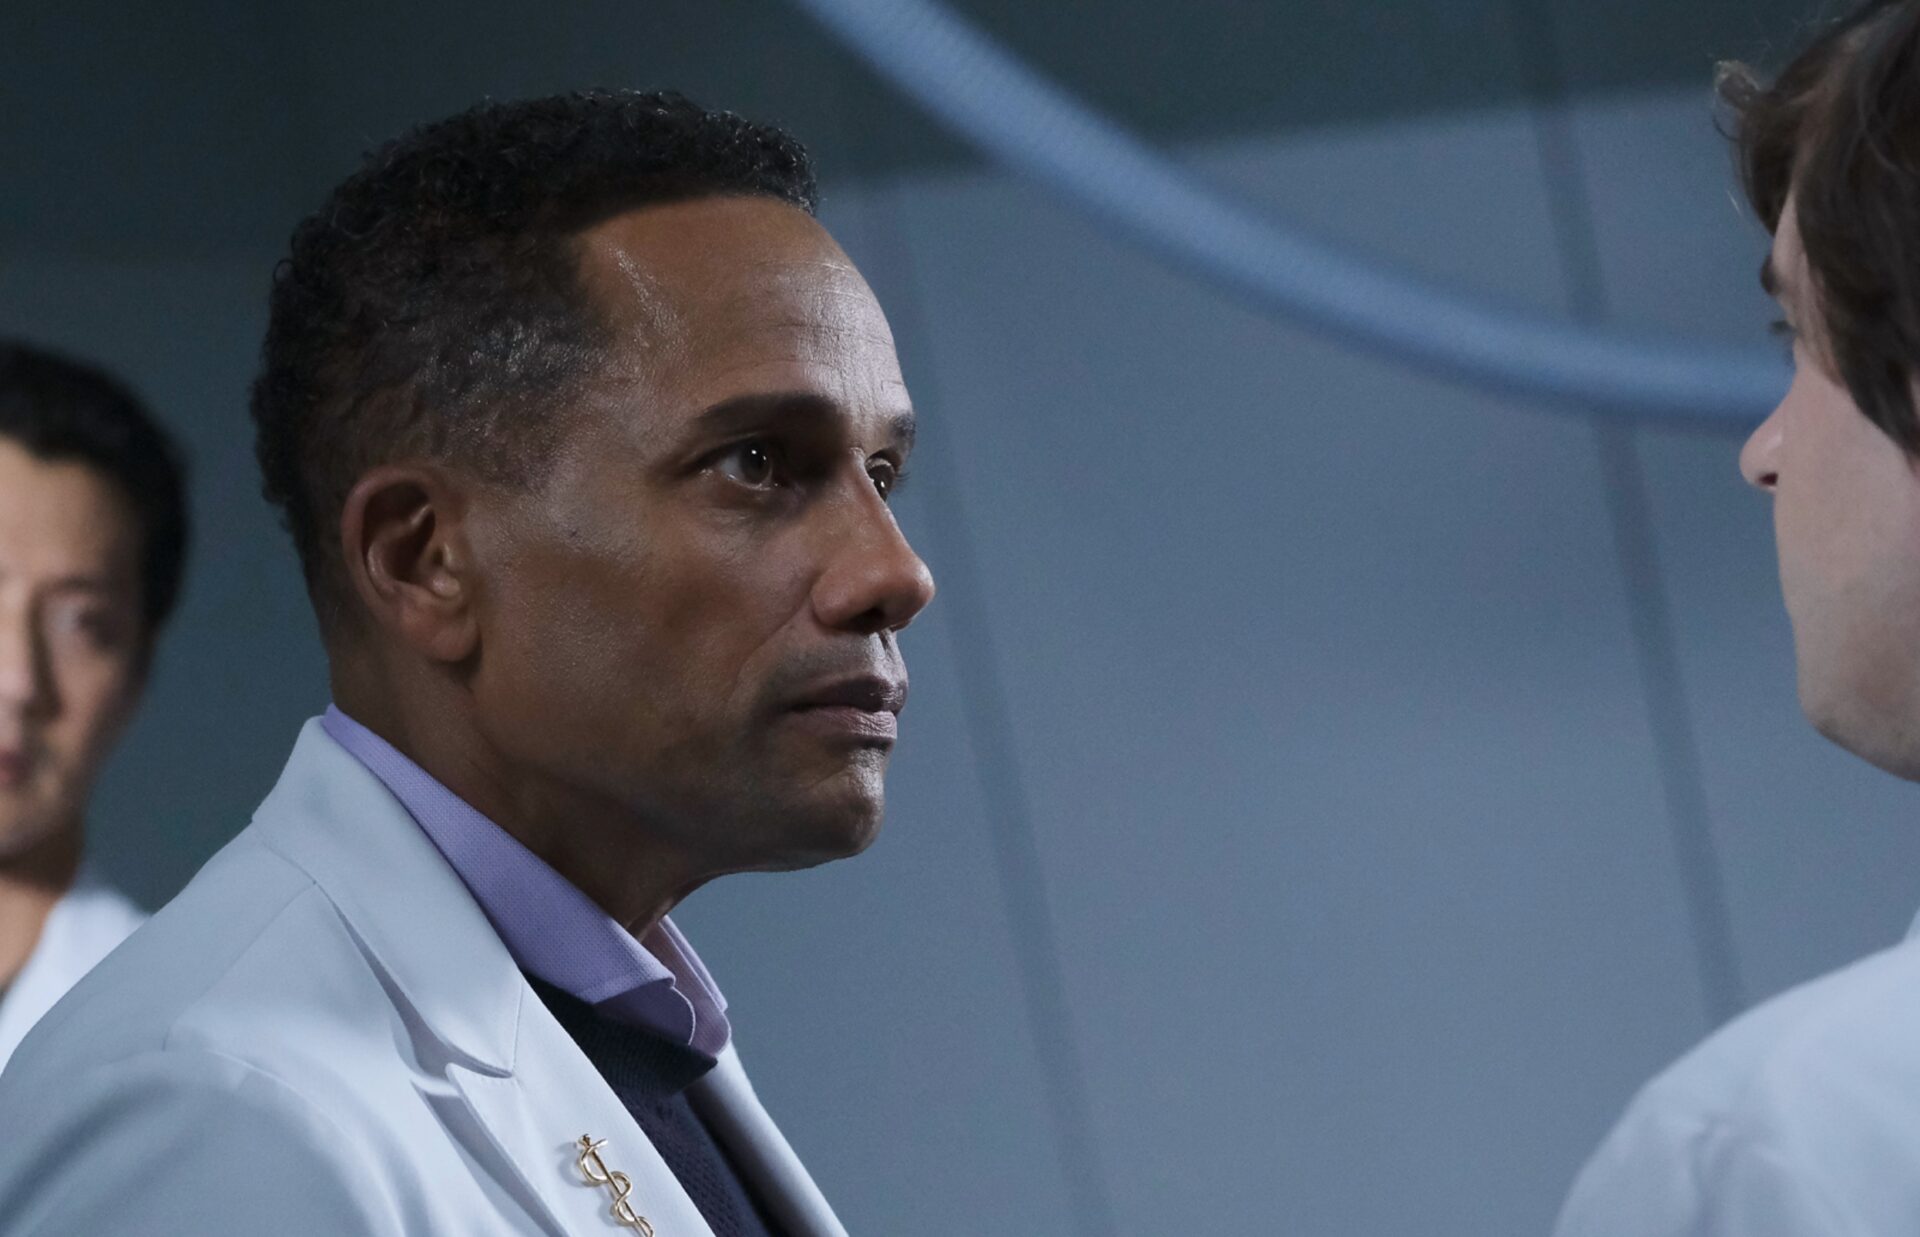 The Good Candidate: Hill Harper Leaves ABC’s ‘The Good Doctor’ To Prepare For Senate Run